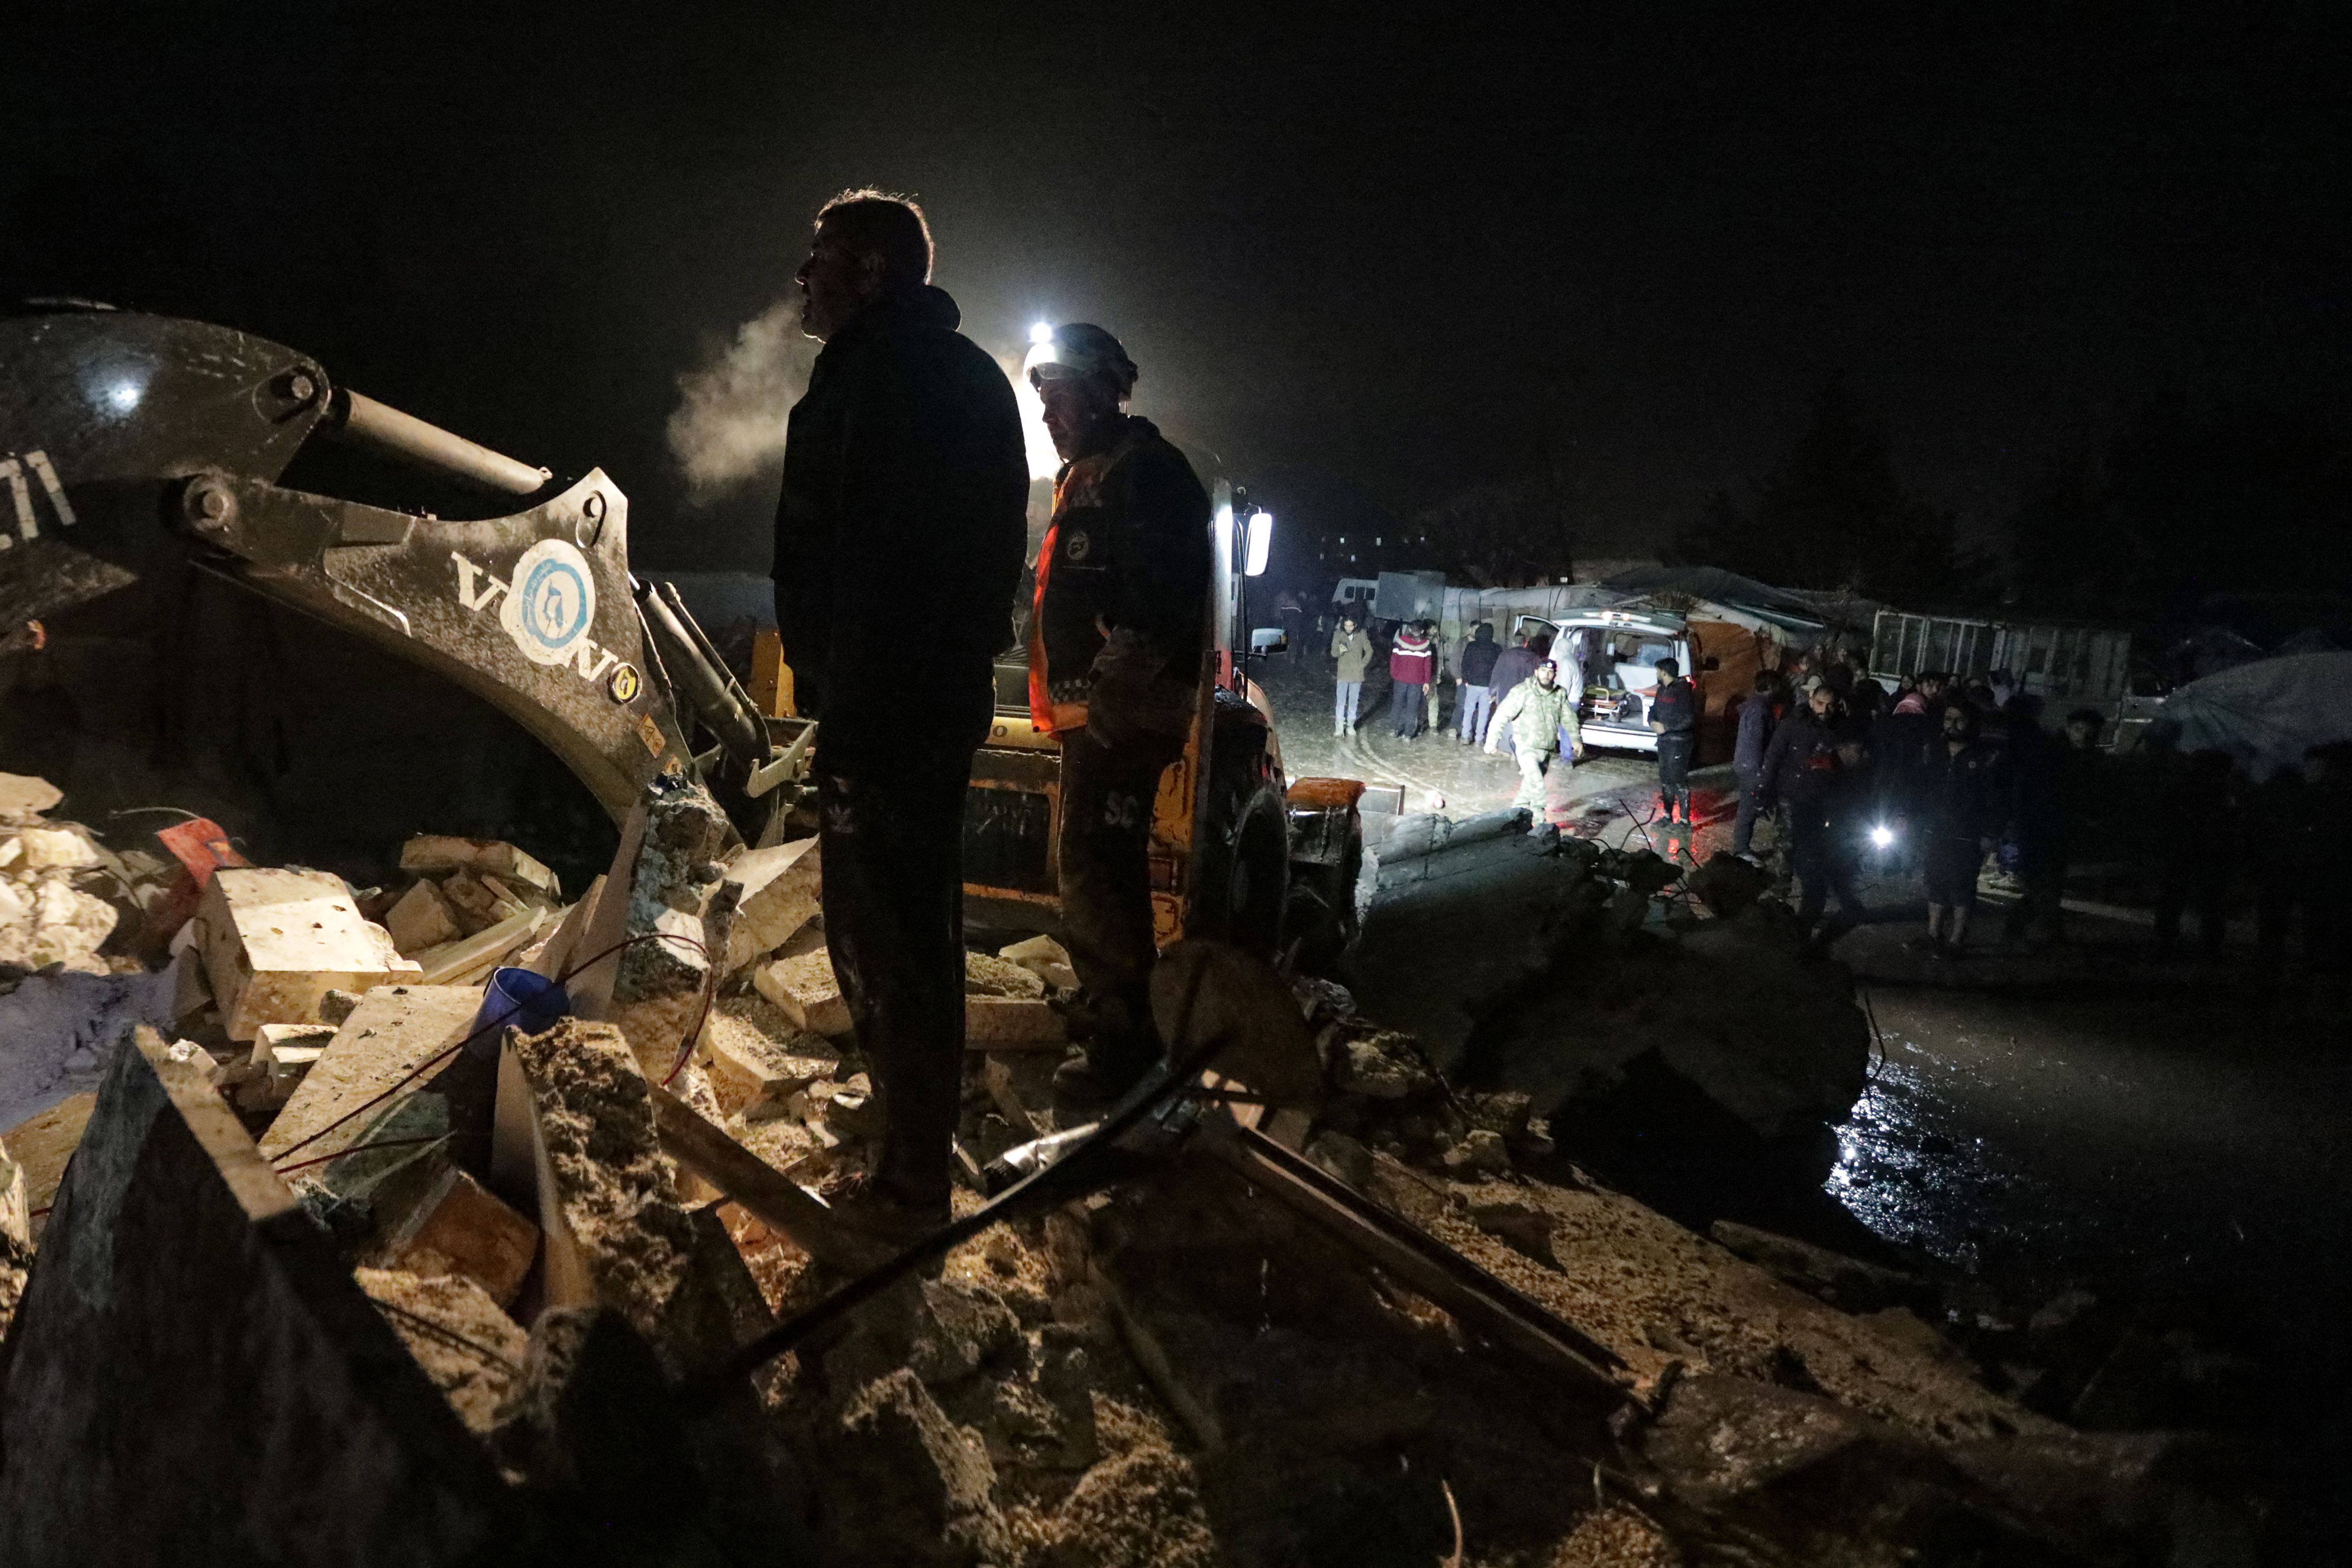 Syrian rescuers (White Helmets) and residents gather near a collapsed building following an earthquake, in the border town of Azaz in the rebel-held north of the Aleppo province, early on February 6.